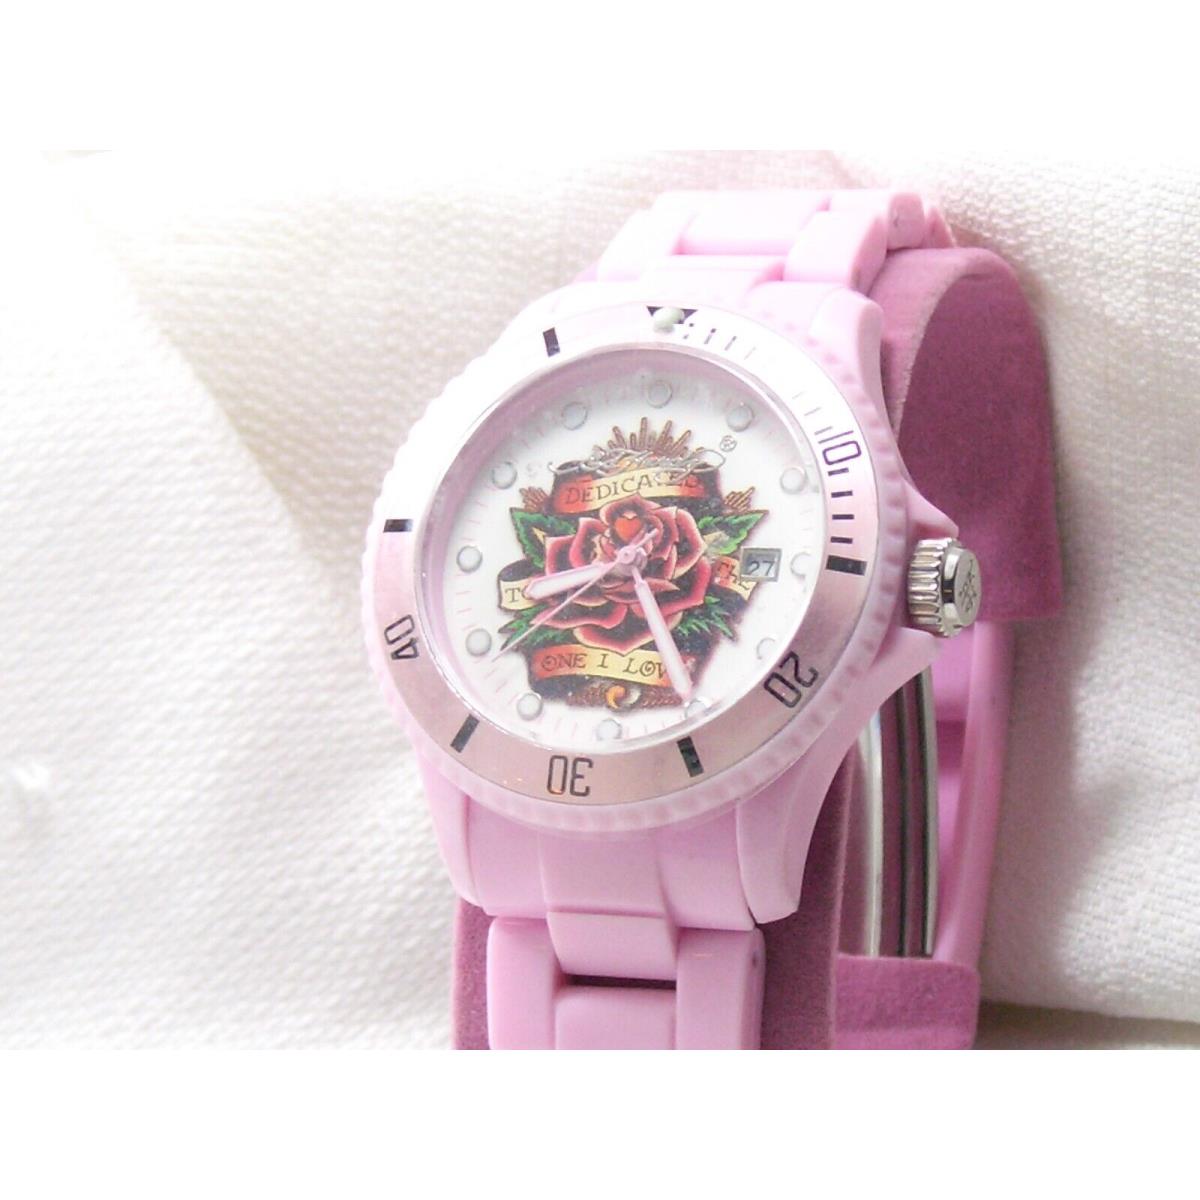 Ed Hardy Watch Pink Band Dedicated to The One I Love Roses Dial